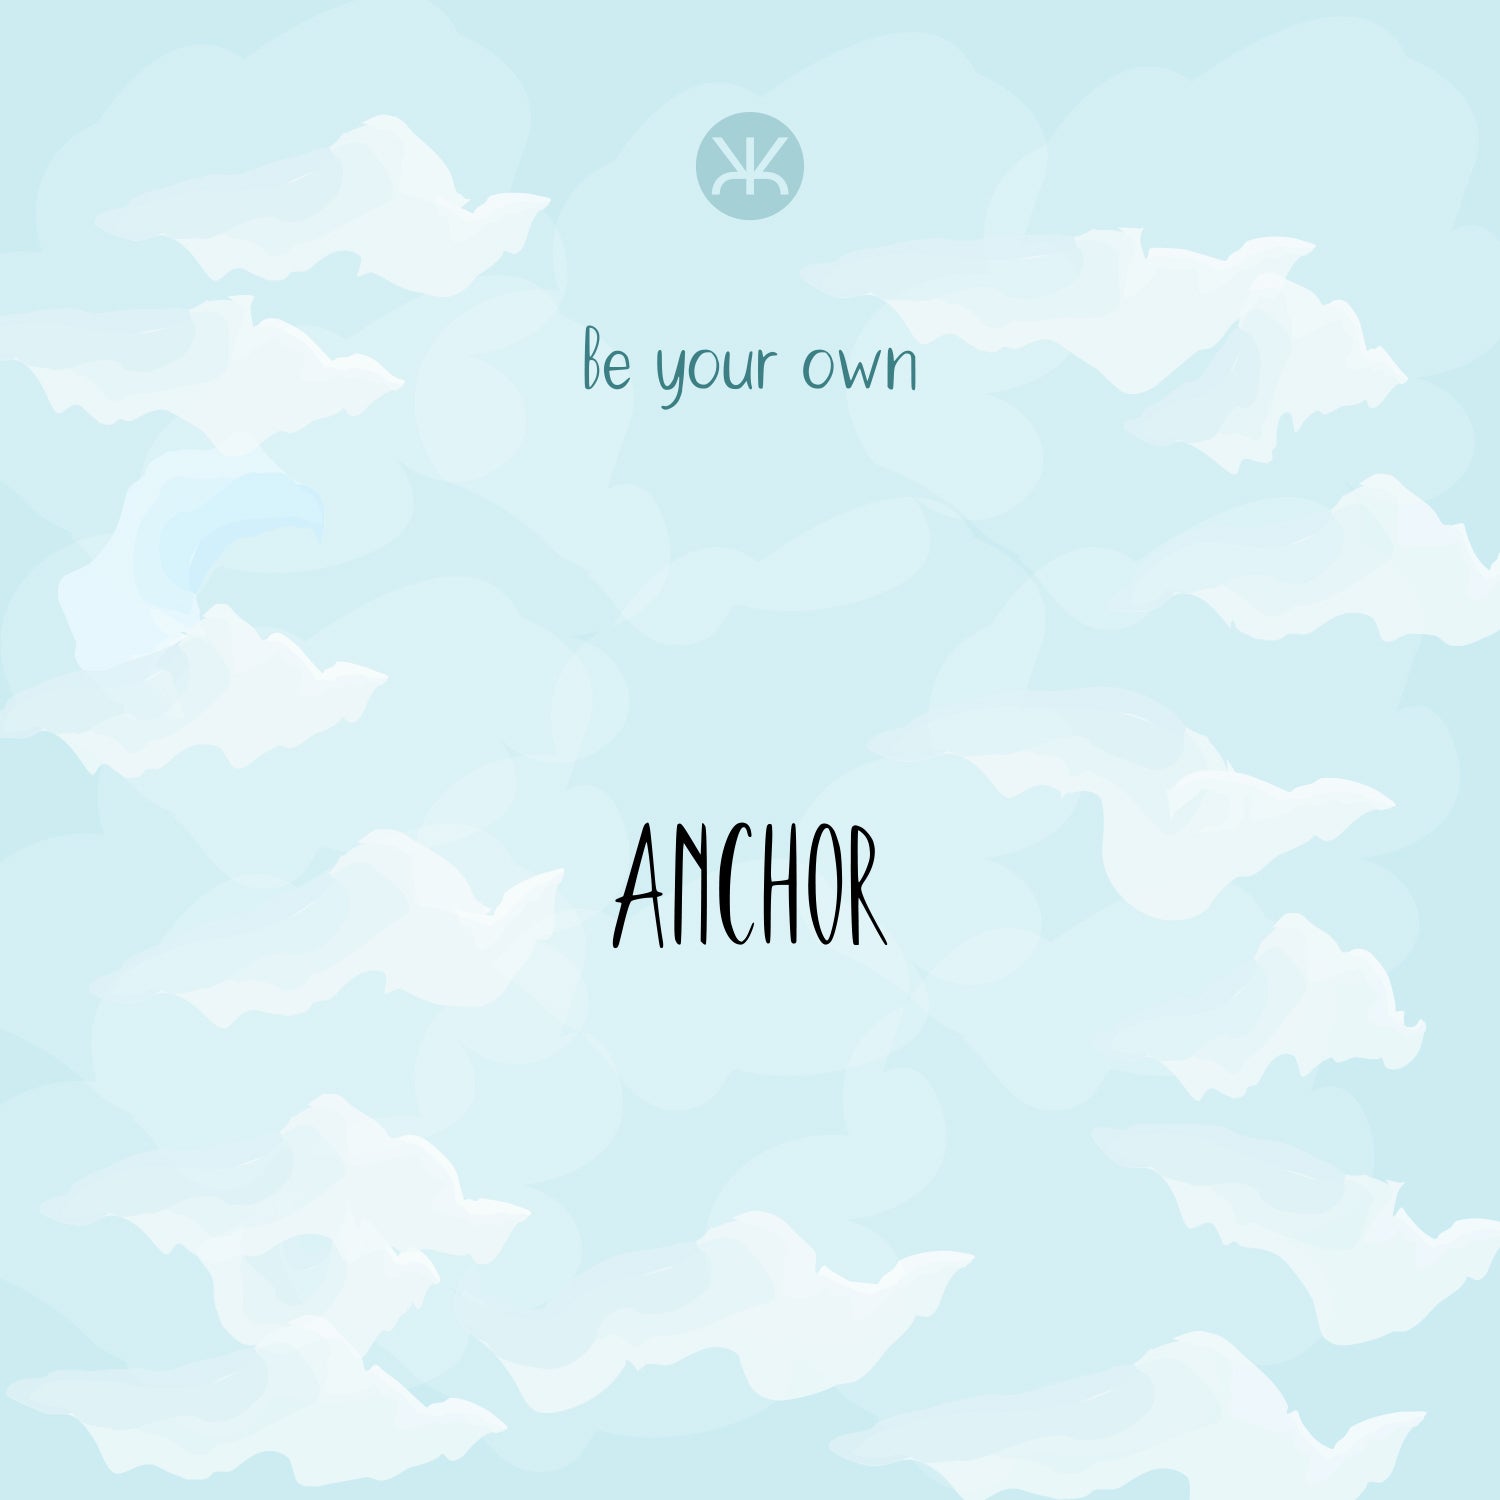 Be your own ANCHOR